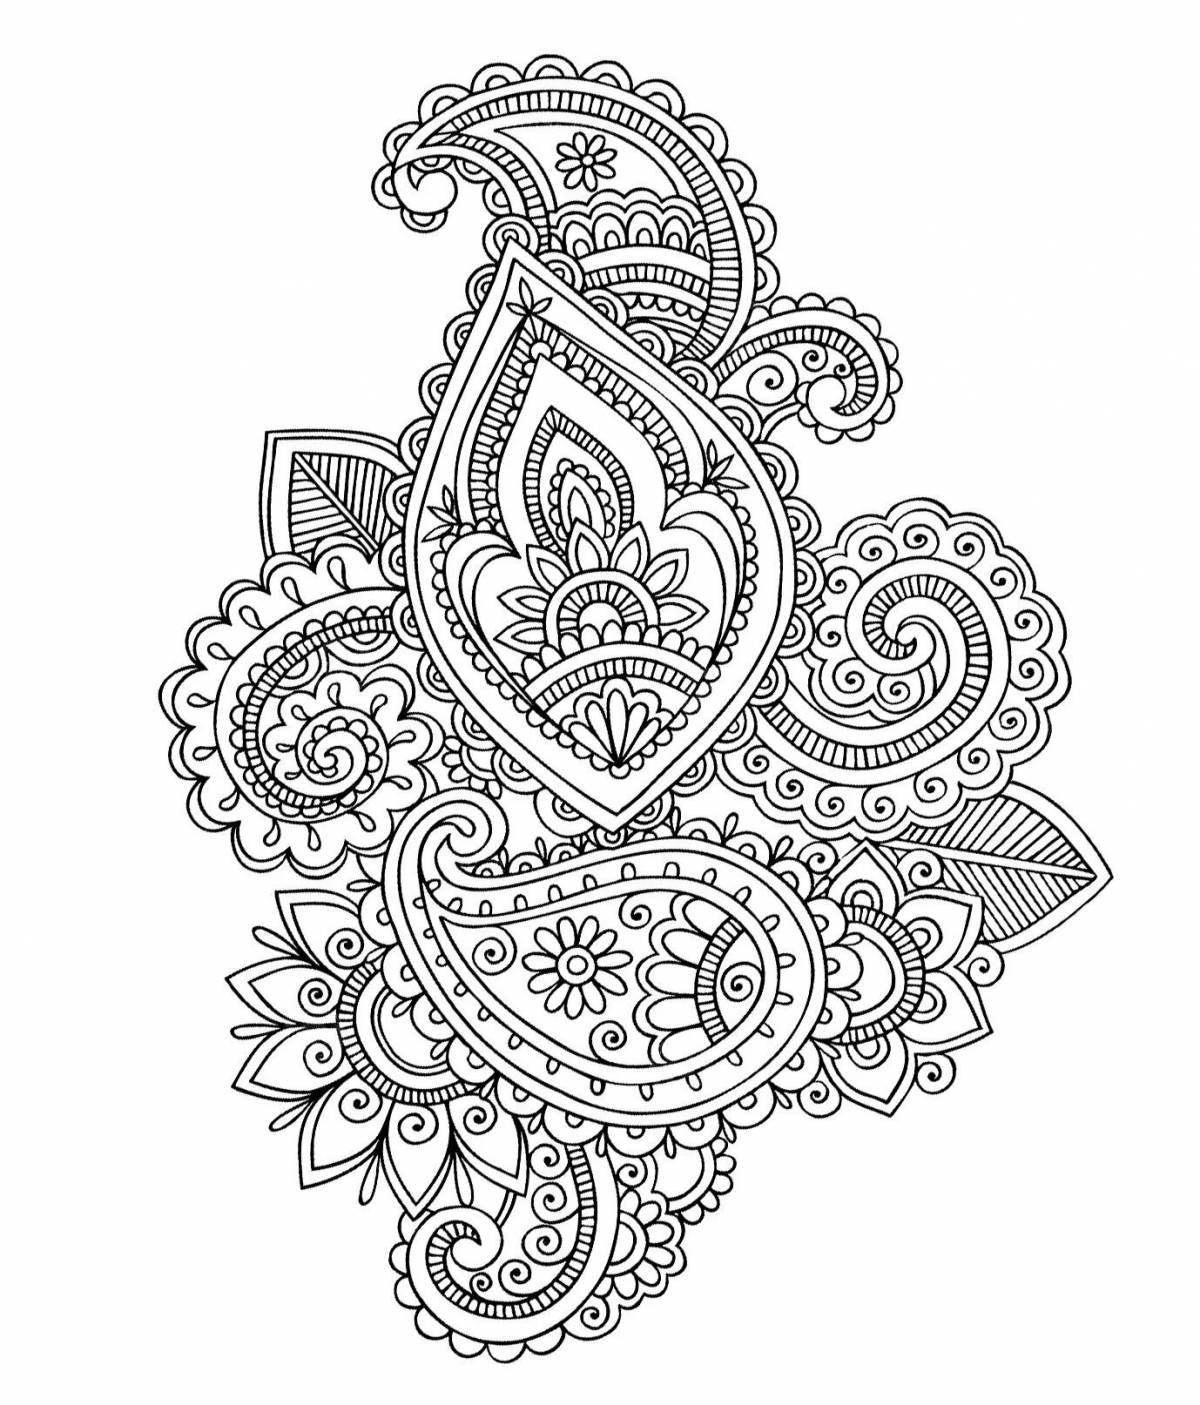 Bright patterns and ornaments for coloring